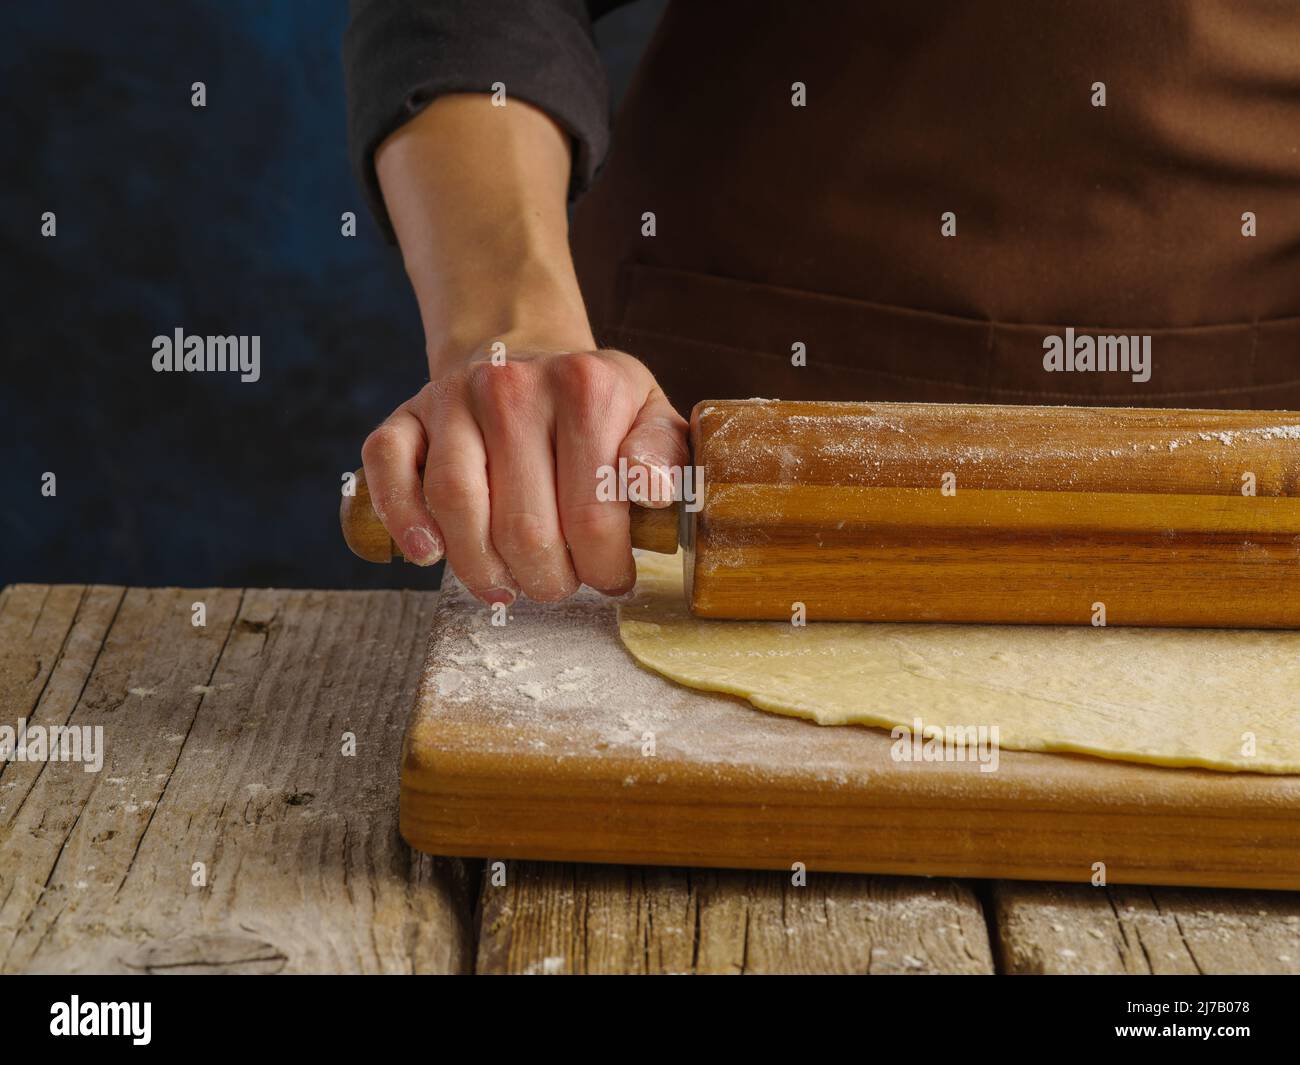 Macro shot. The chef rolls out the dough with a rolling pin on a wooden background. The concept is recipes for dough products - pastries, pasta, pizza Stock Photo